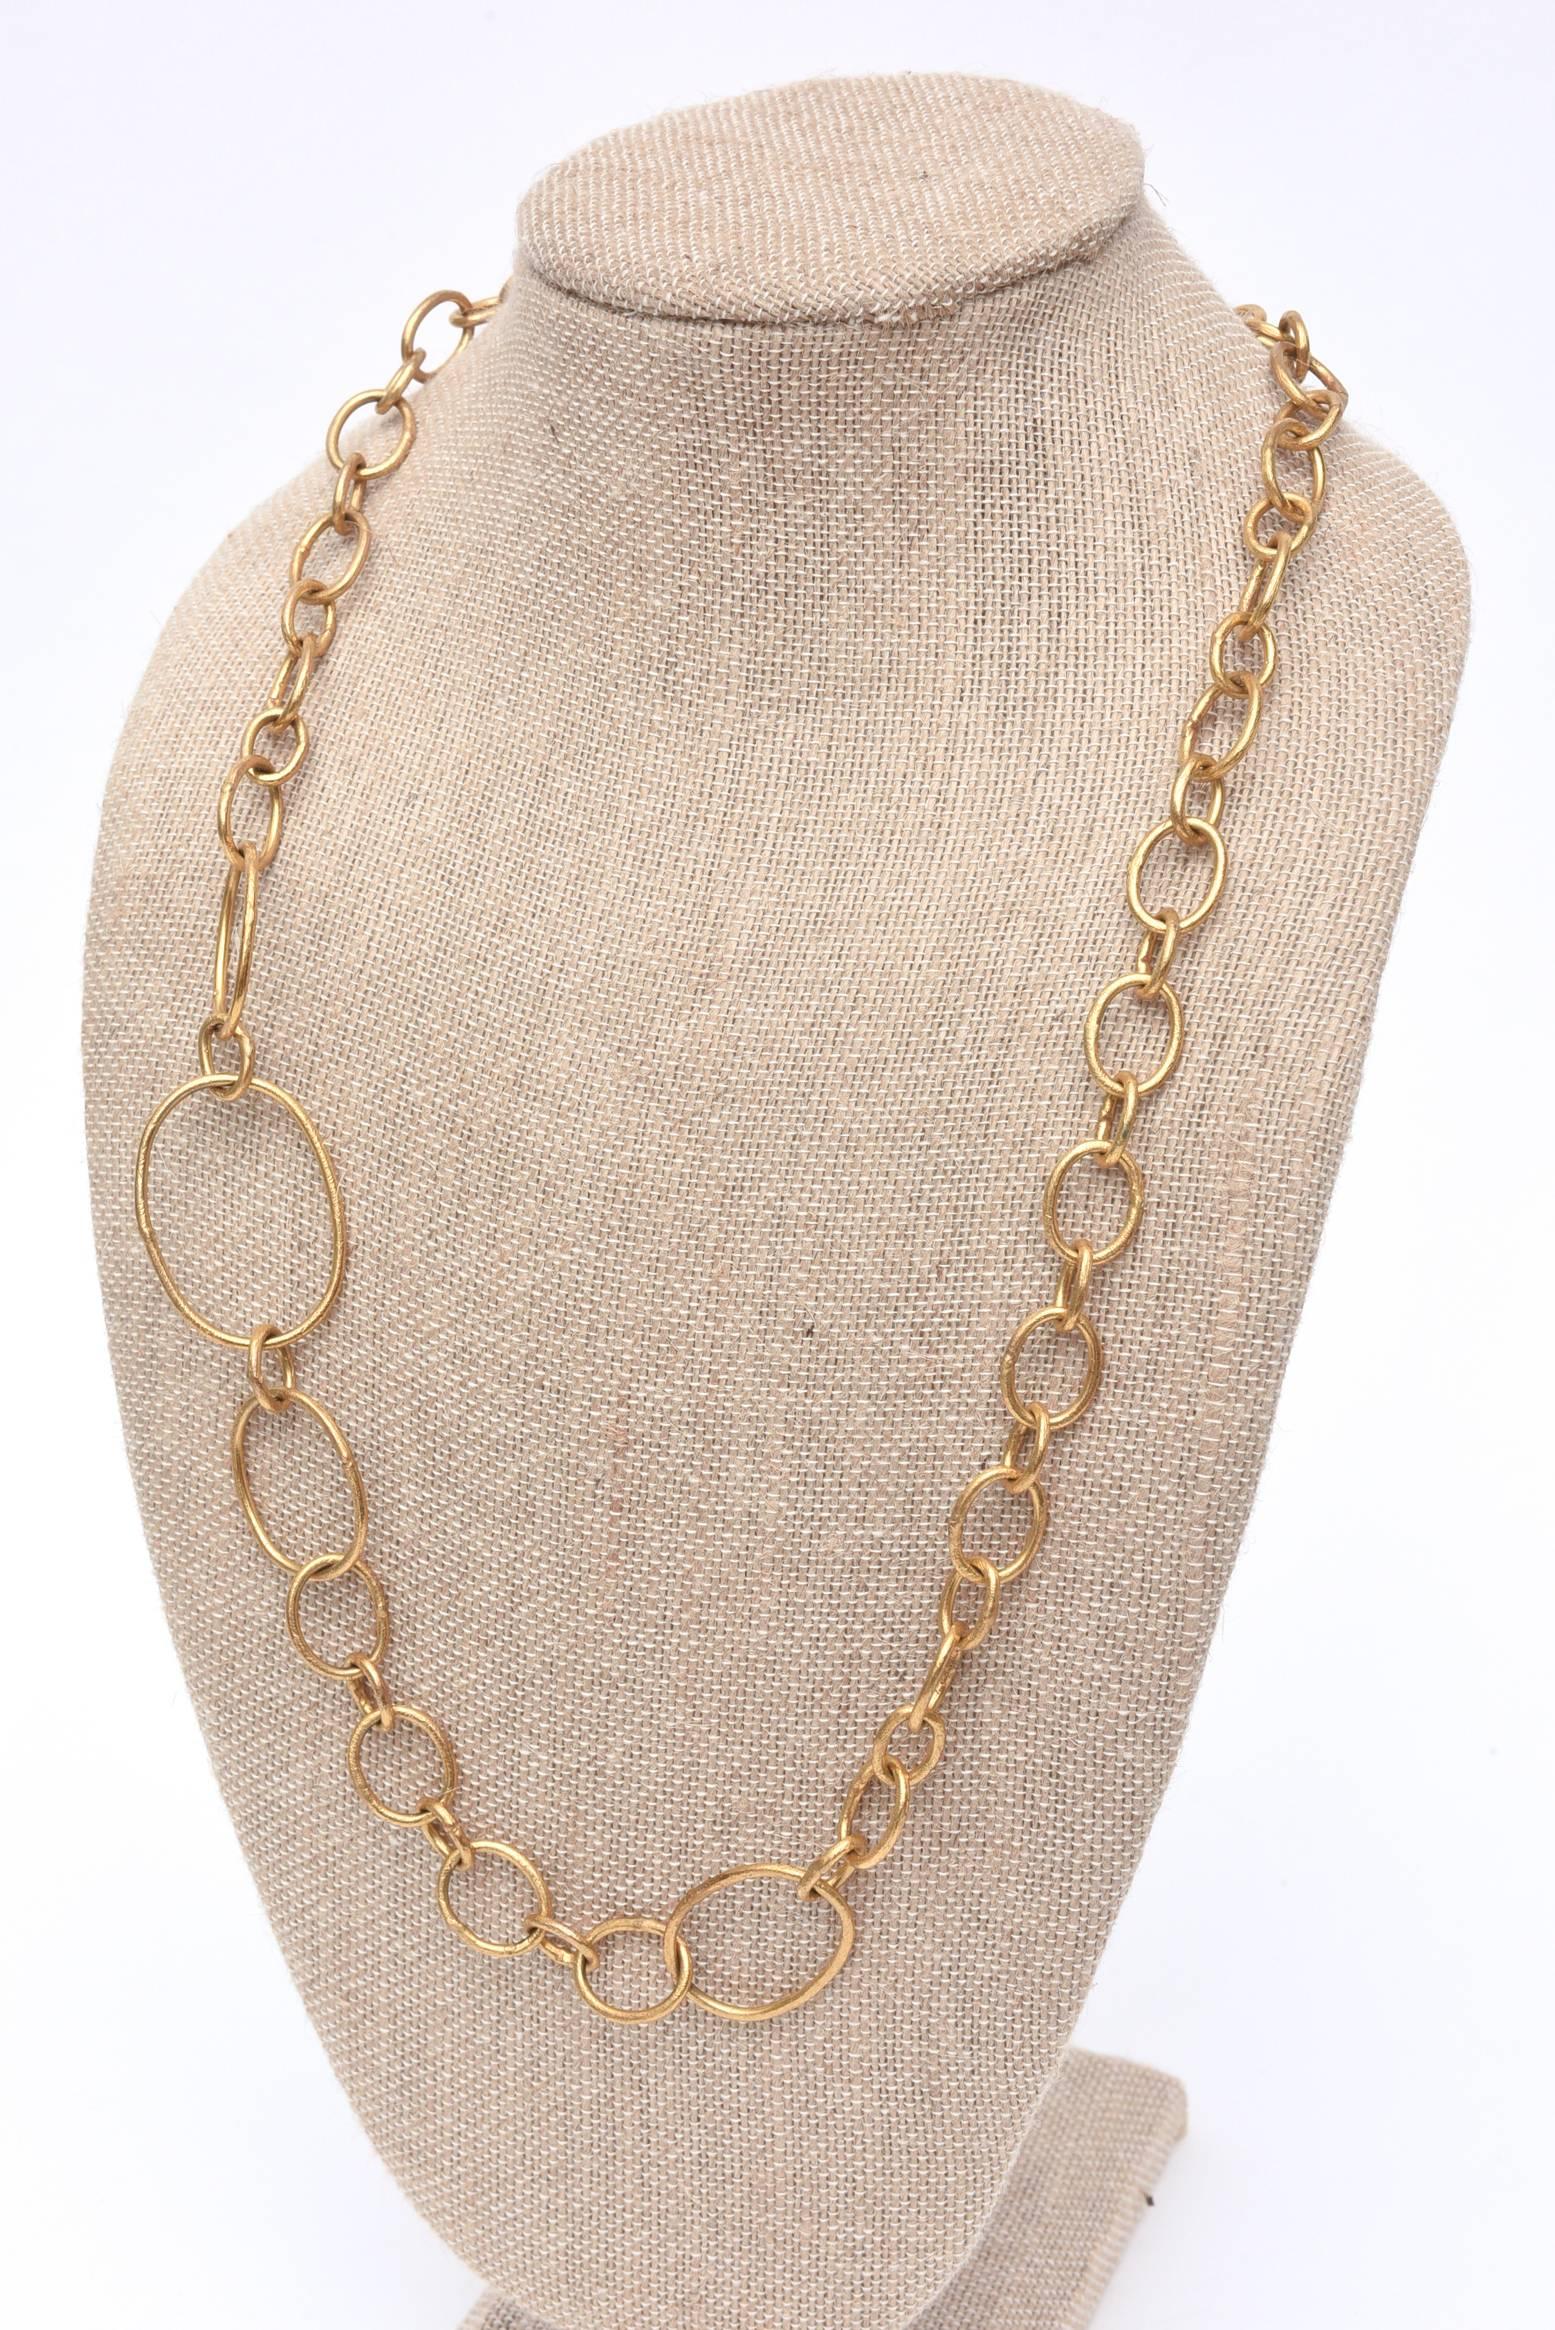 Alexis Bittar Link Chain Necklace For Sale at 1stDibs